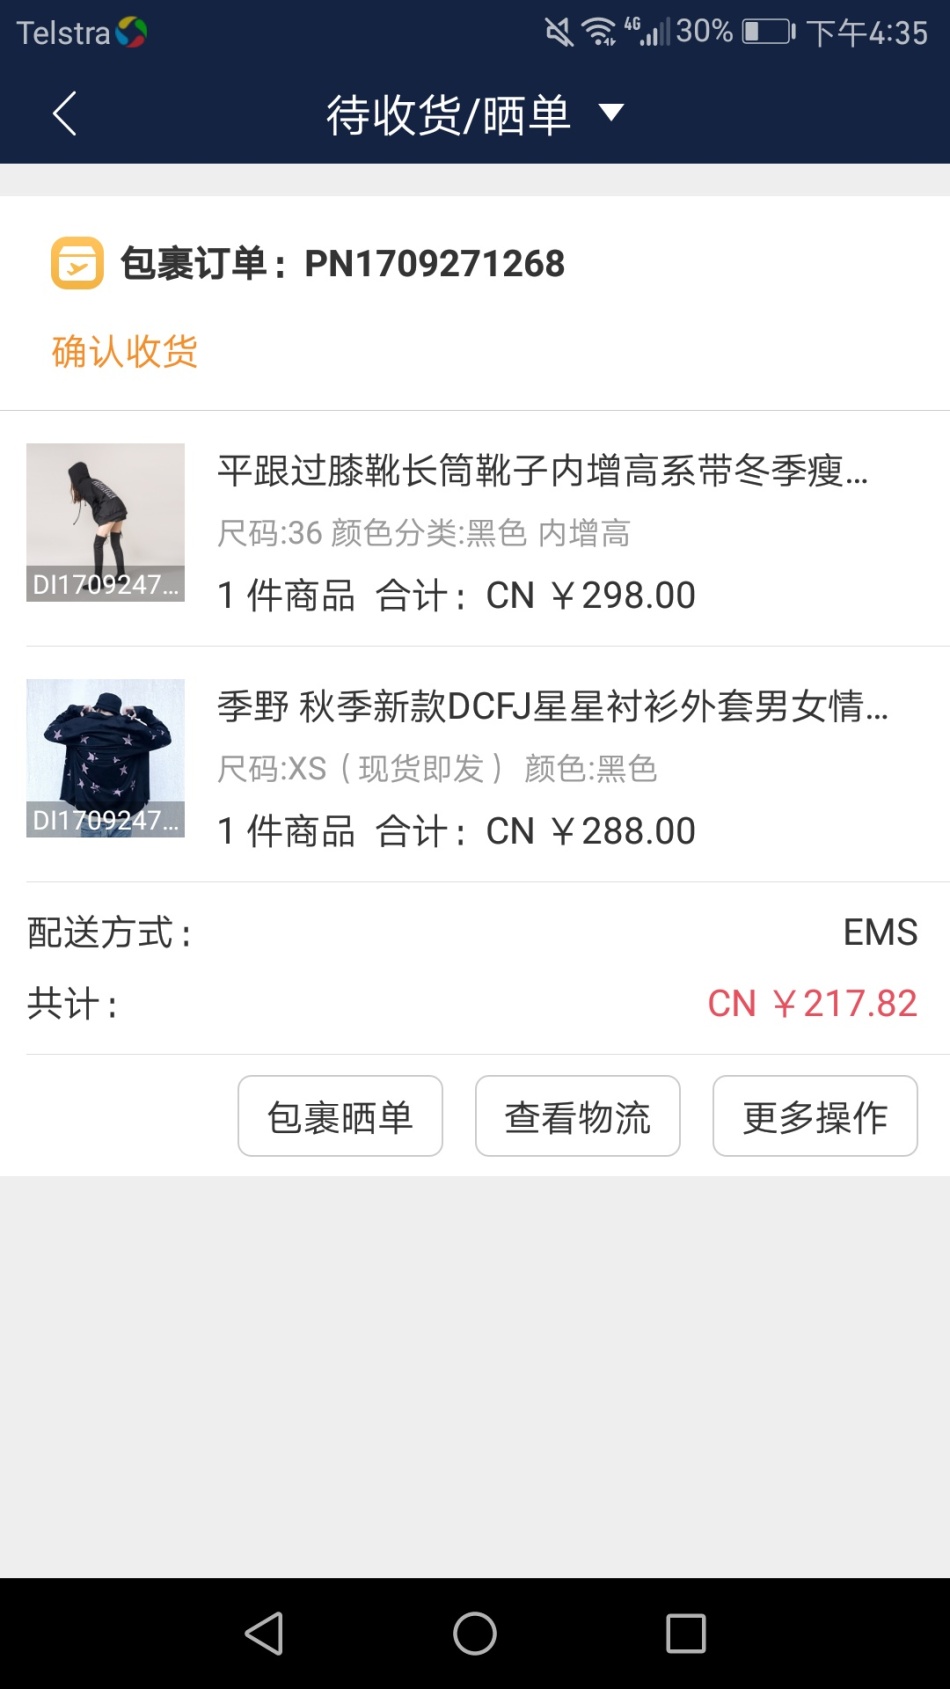 http://img1.superbuy.com/images/consult/2017/09/28/ef3499aa20cf6ba1f69a11a7968f88c3.jpg?x-oss-process=image/resize,w_950